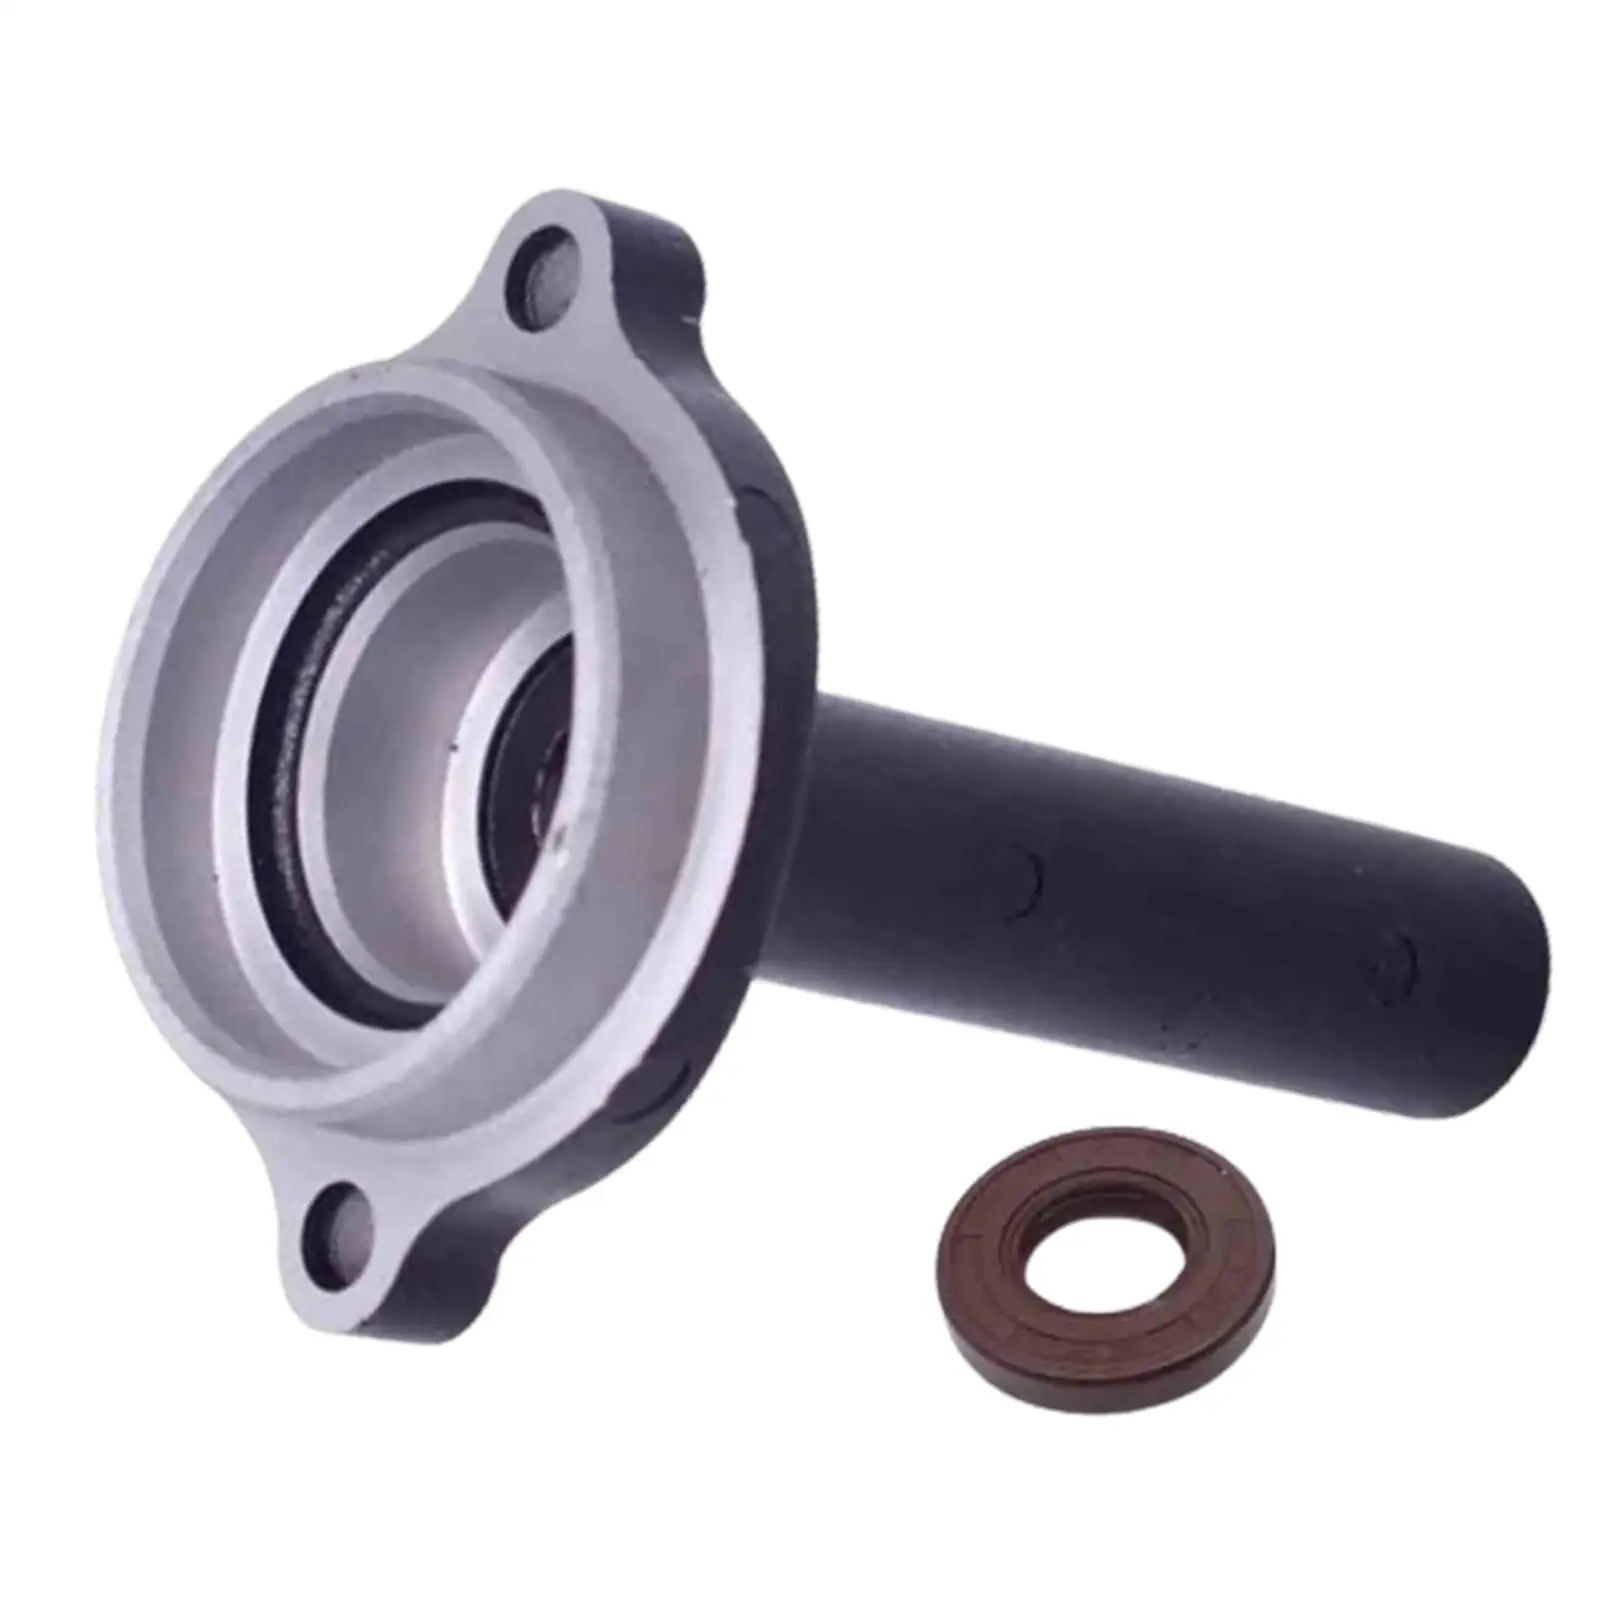 3B2-01210 Easy Installation Assembly Repair Parts Oil Seal Accessories replace for Tohatsu Nissan Outboard 8HP 9.8HP 2T